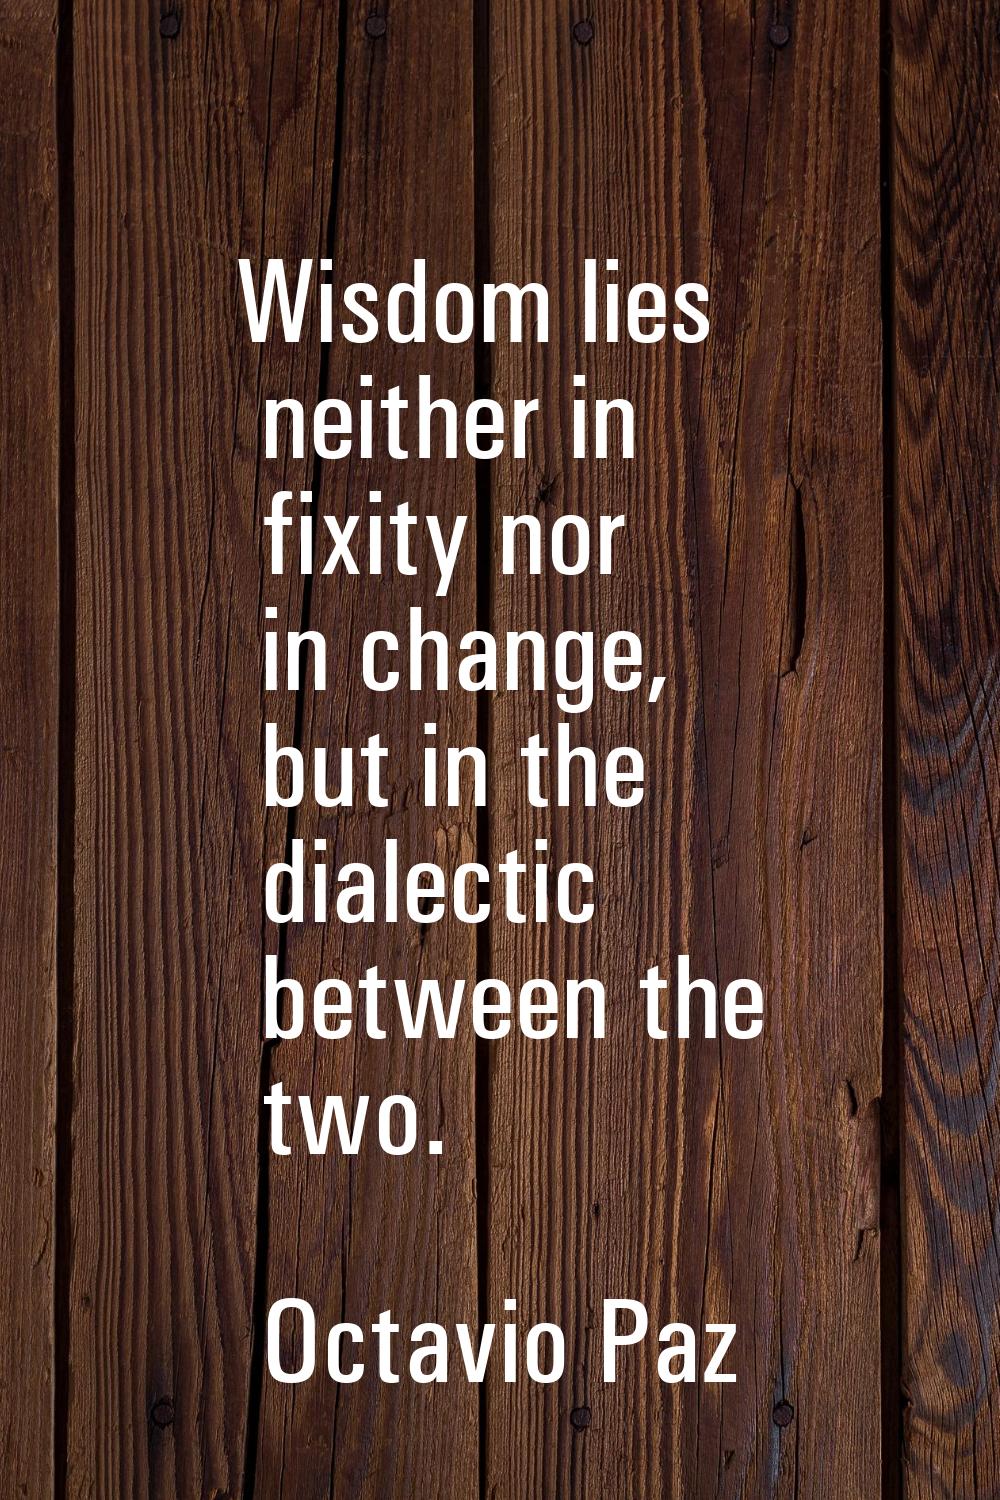 Wisdom lies neither in fixity nor in change, but in the dialectic between the two.